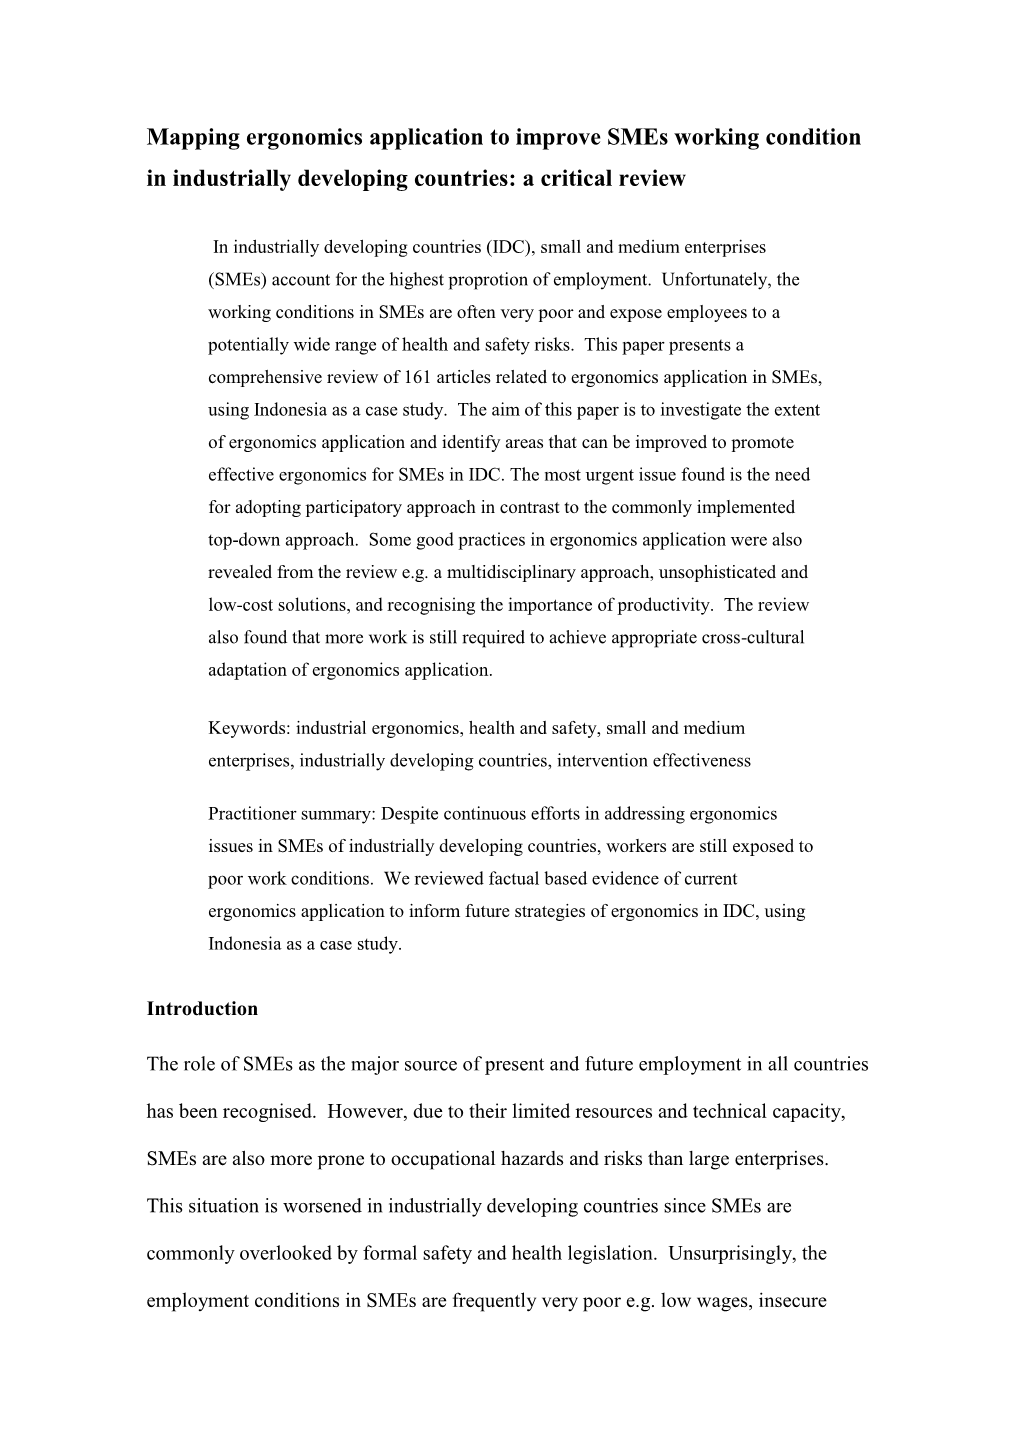 Mapping Ergonomics Application to Improve Smes Working Condition in Industrially Developing Countries: a Critical Review